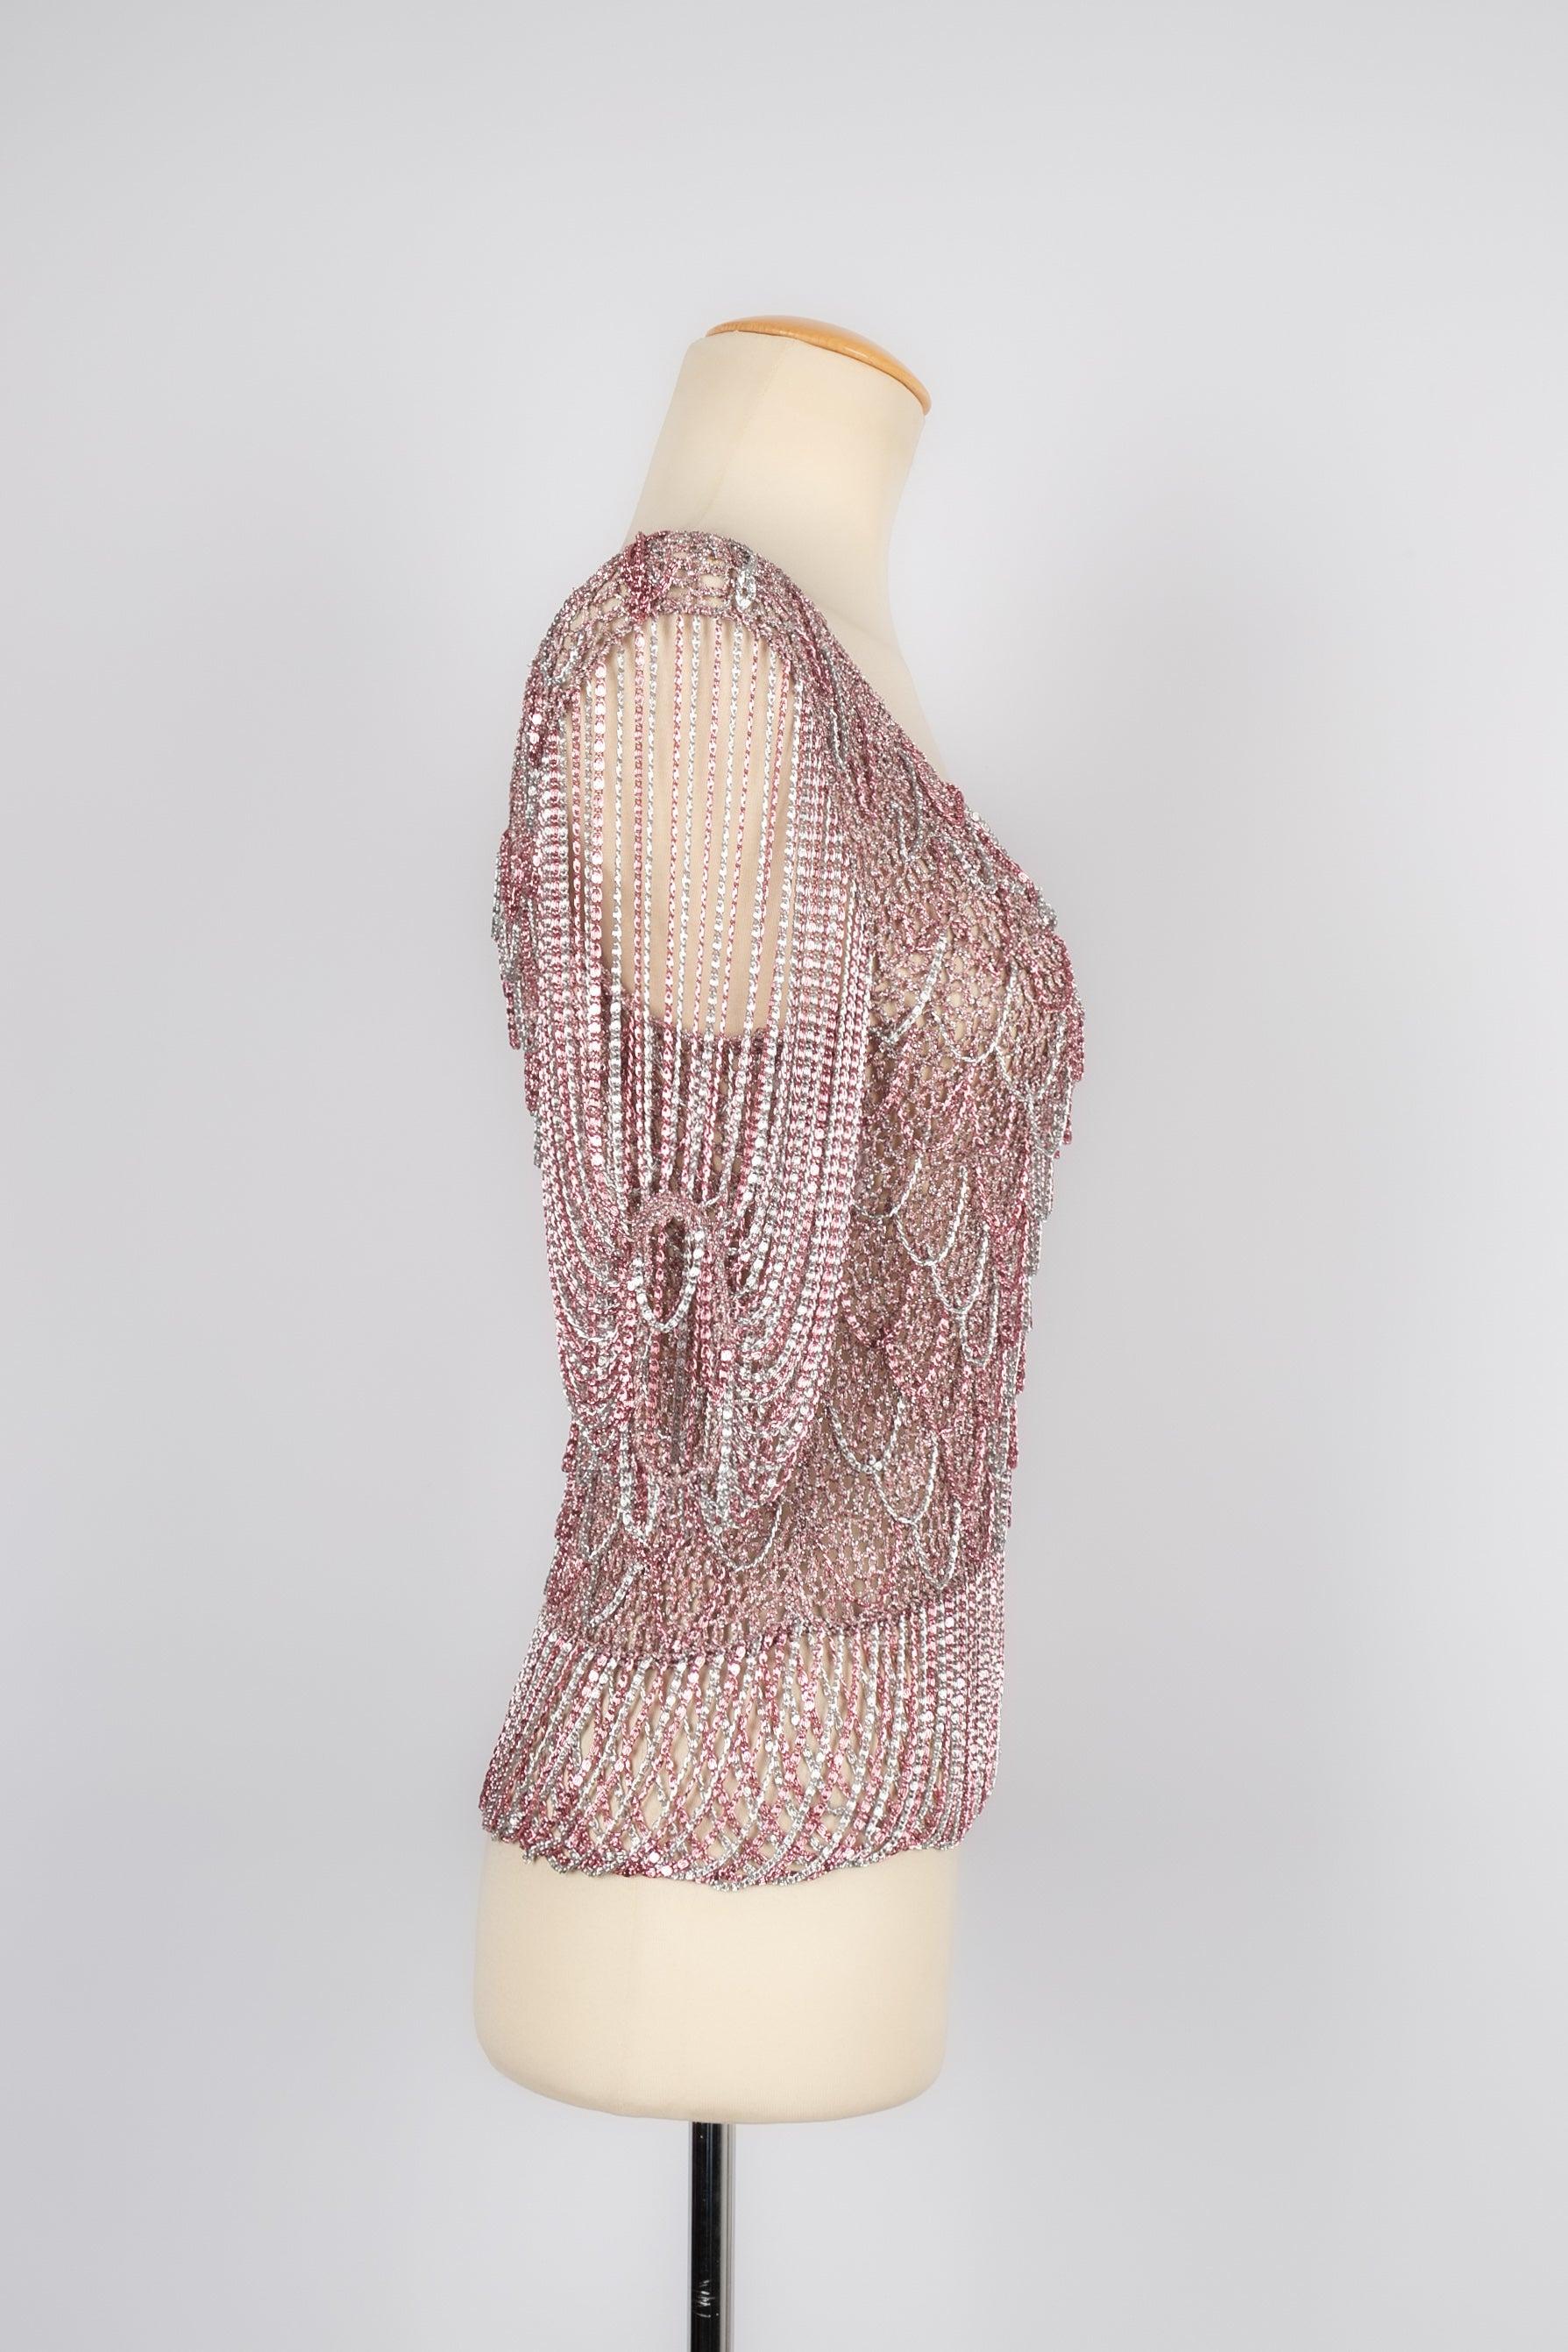 Azzaro - (Made in France) 1970's silvery and pink lurex top ornamented with a chain. No composition nor size label, it fits a 36FR.

Additional information:
Condition: Very good condition
Dimensions: Shoulder width: 40 cm - Chest: 36 cm - Waist: 29